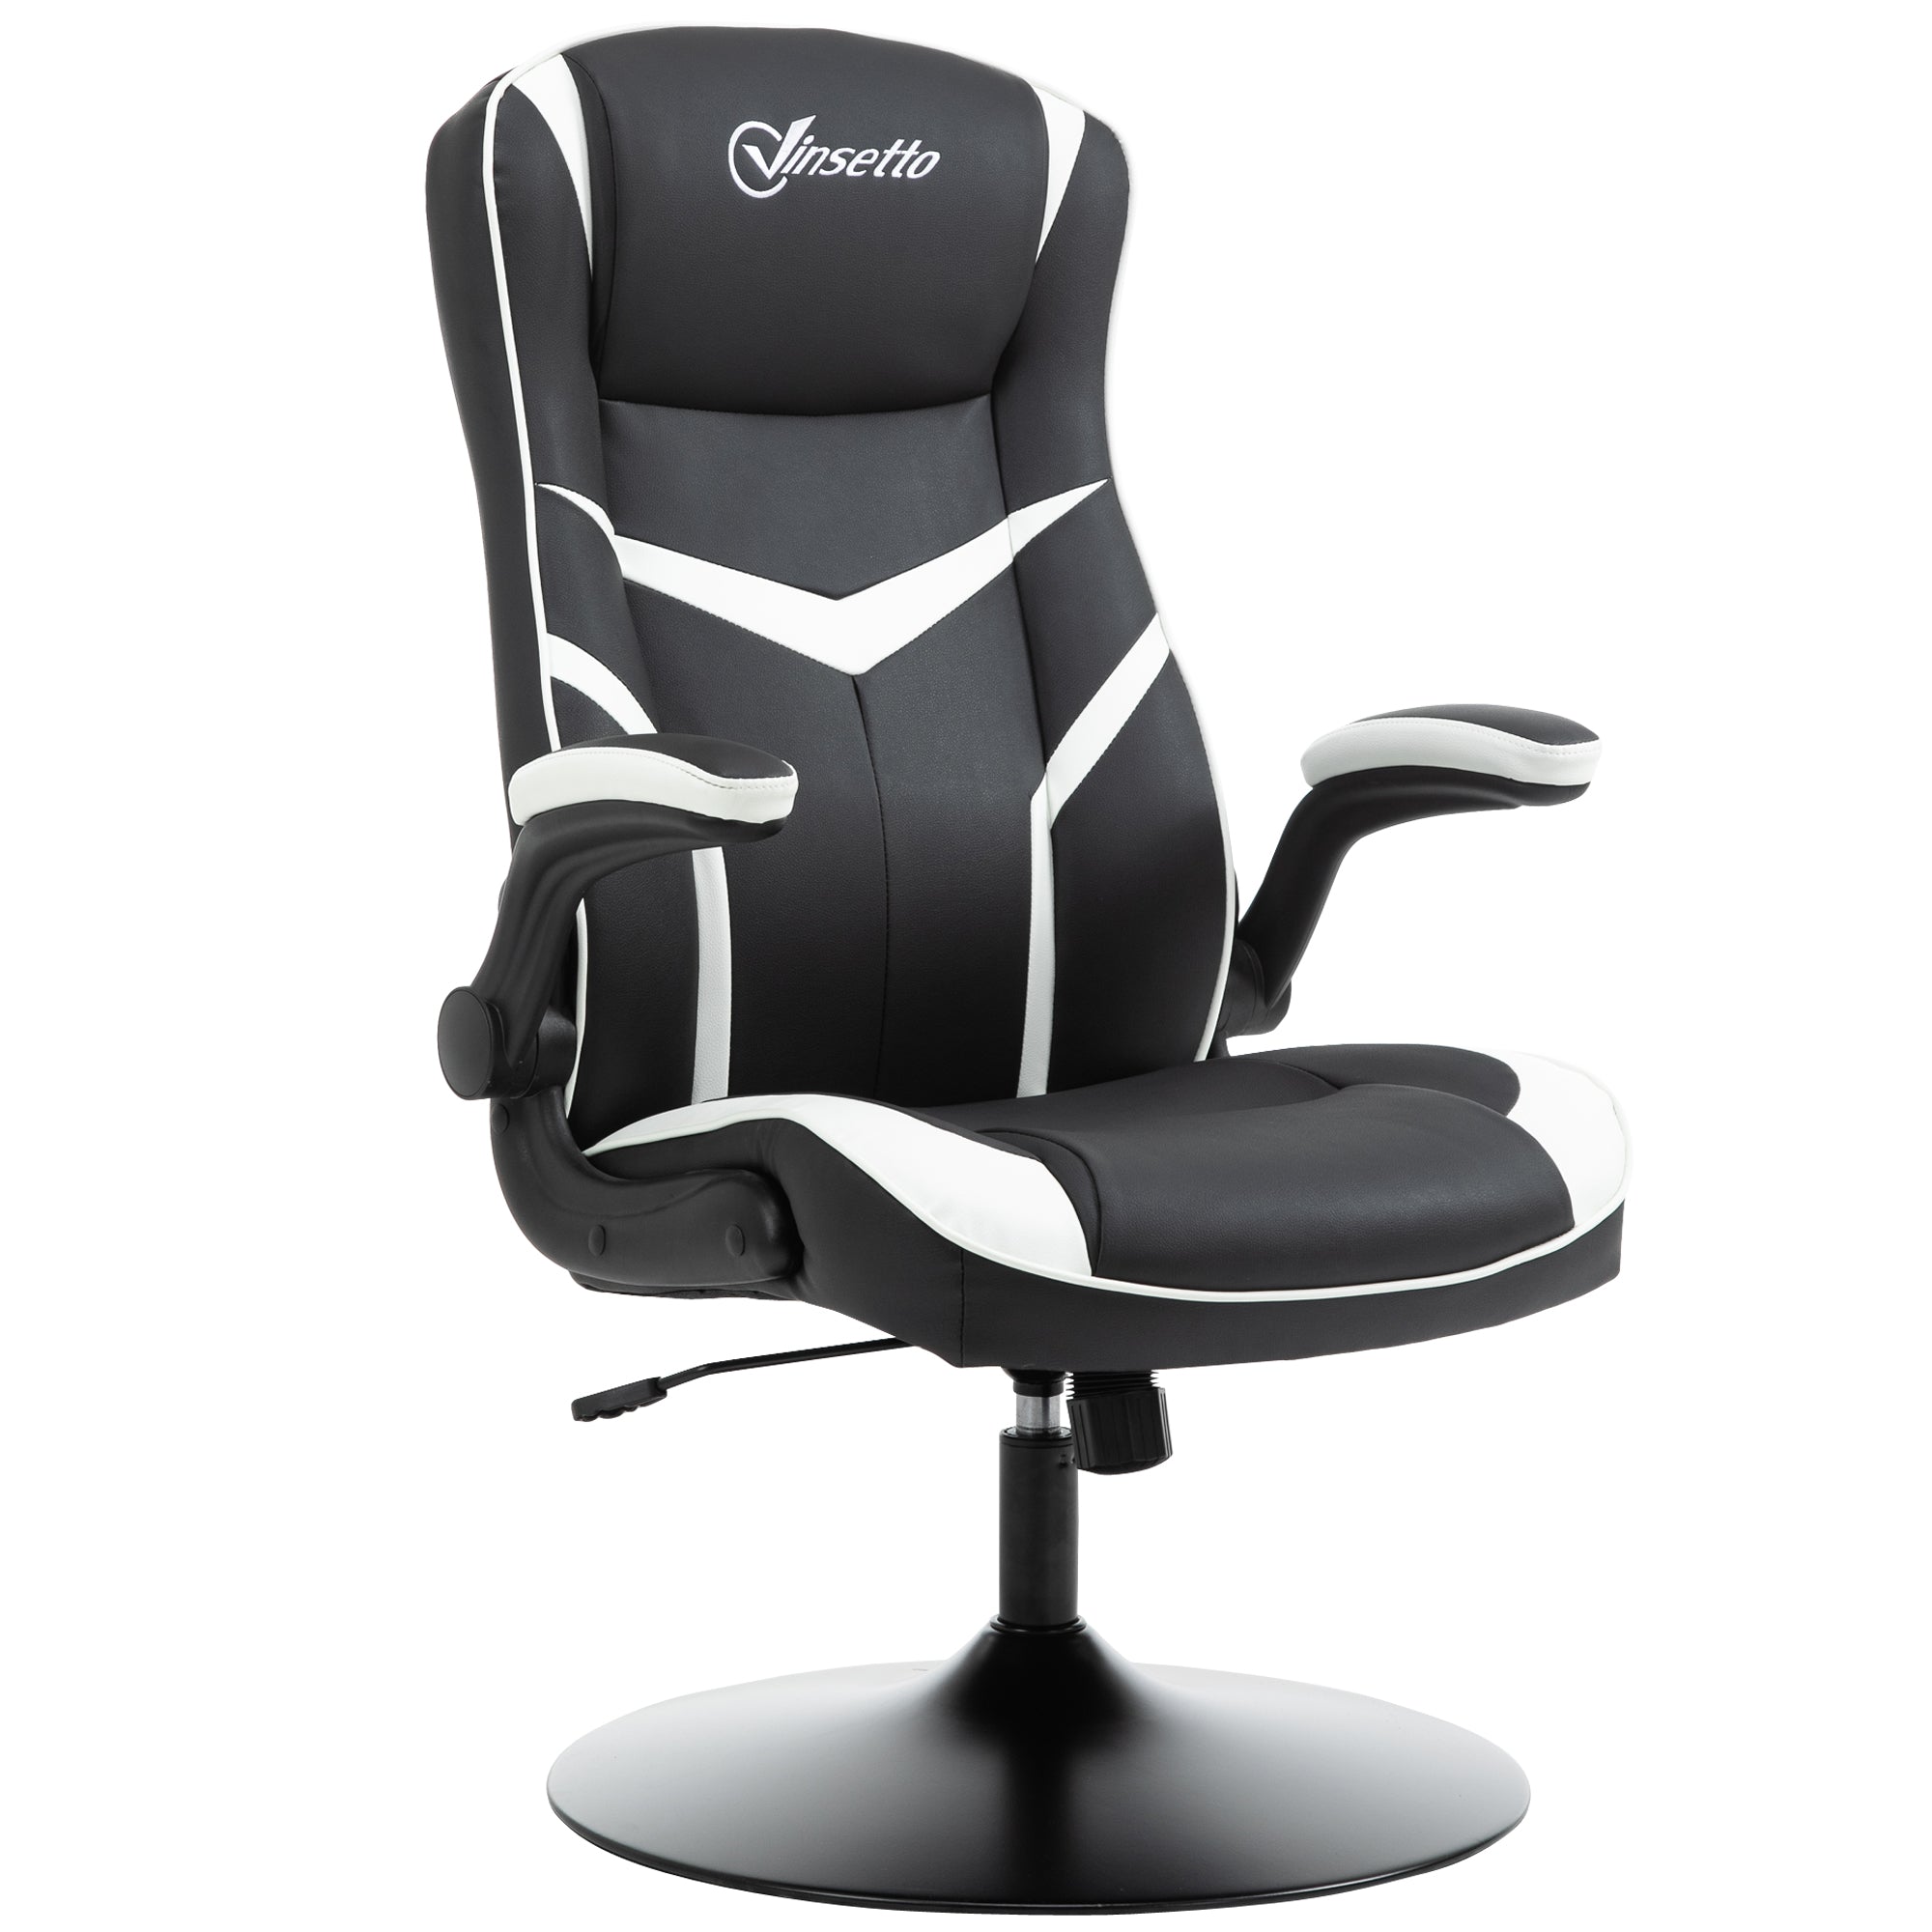 Gaming Chair Ergonomic Computer Chair Home Office Desk Swivel Chair w/ Adjustable Height Pedestal Base PVC Leather, Black & White-0